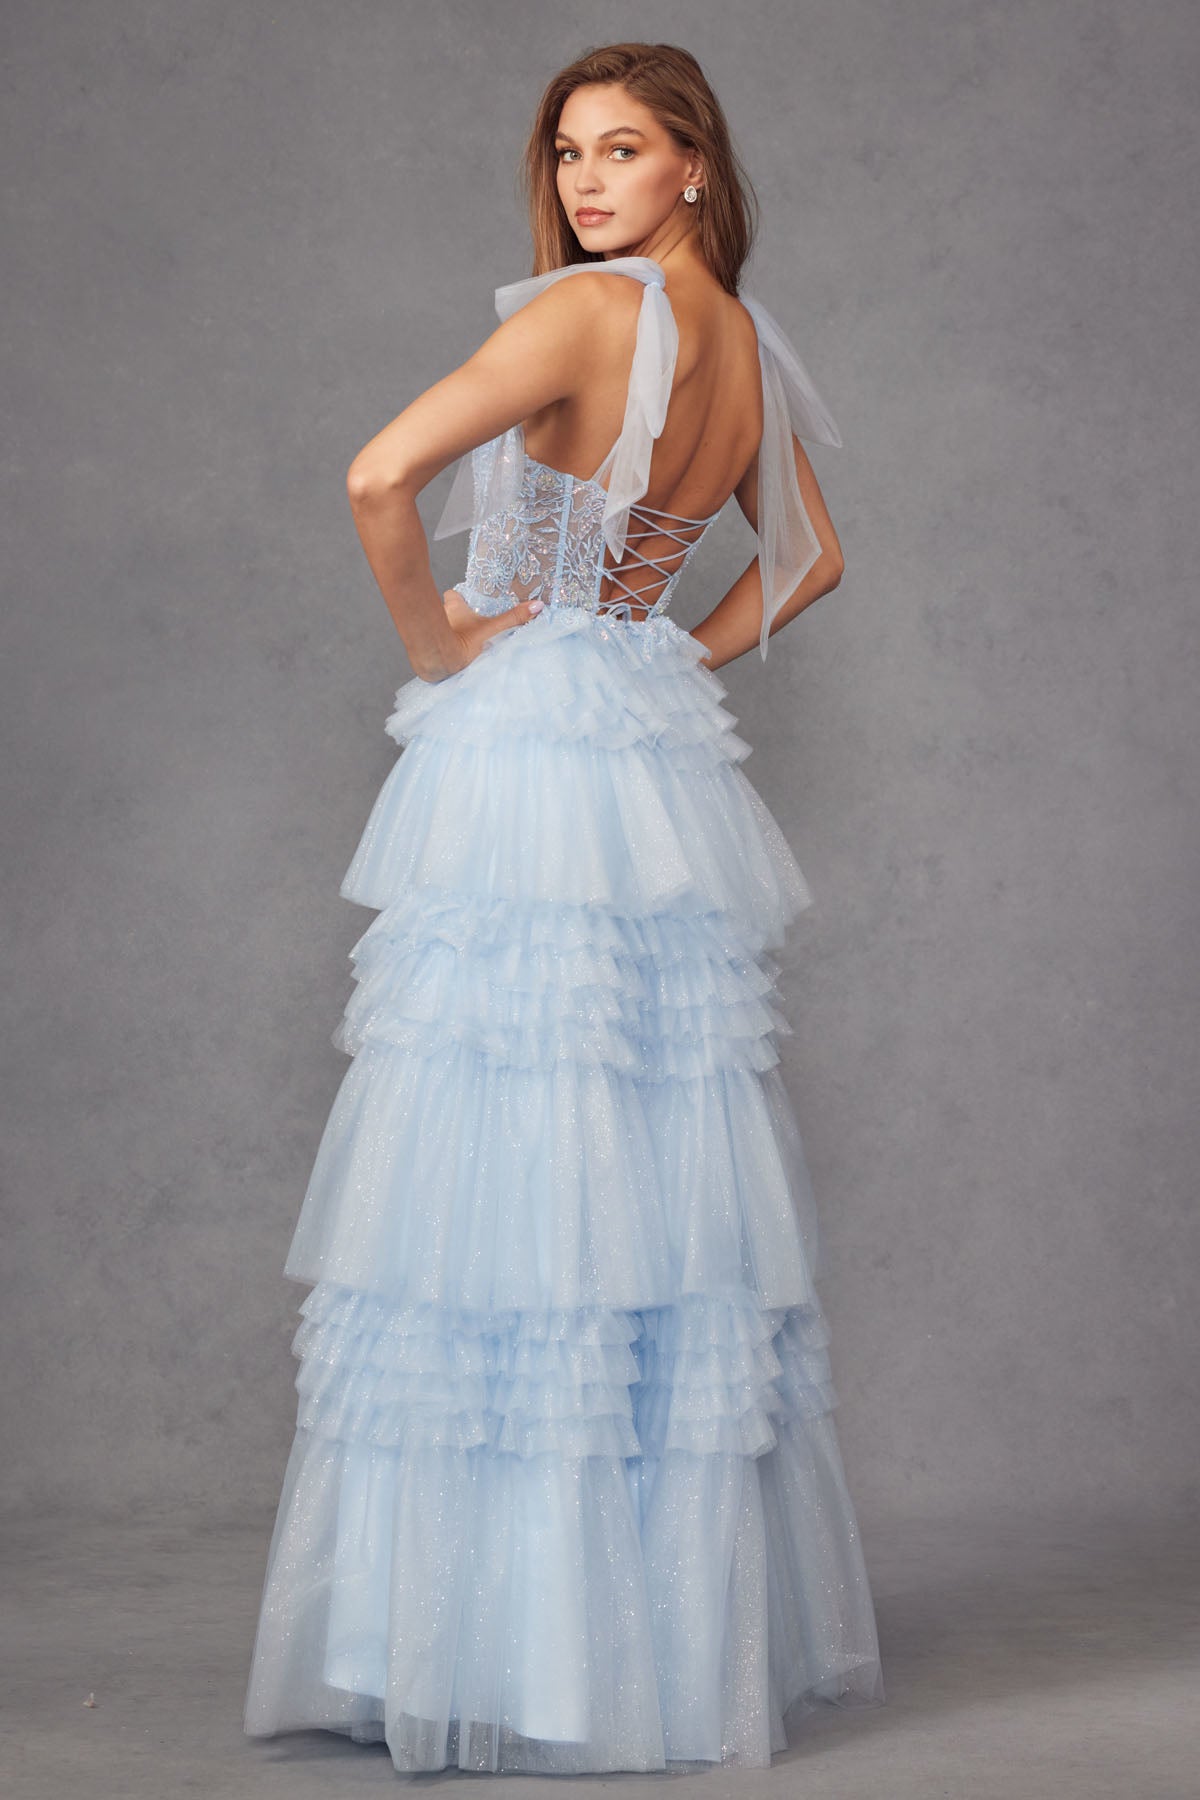 Prom Dresses Tiered Ruffle Skirt Long Formal Prom Gown Ice Blue